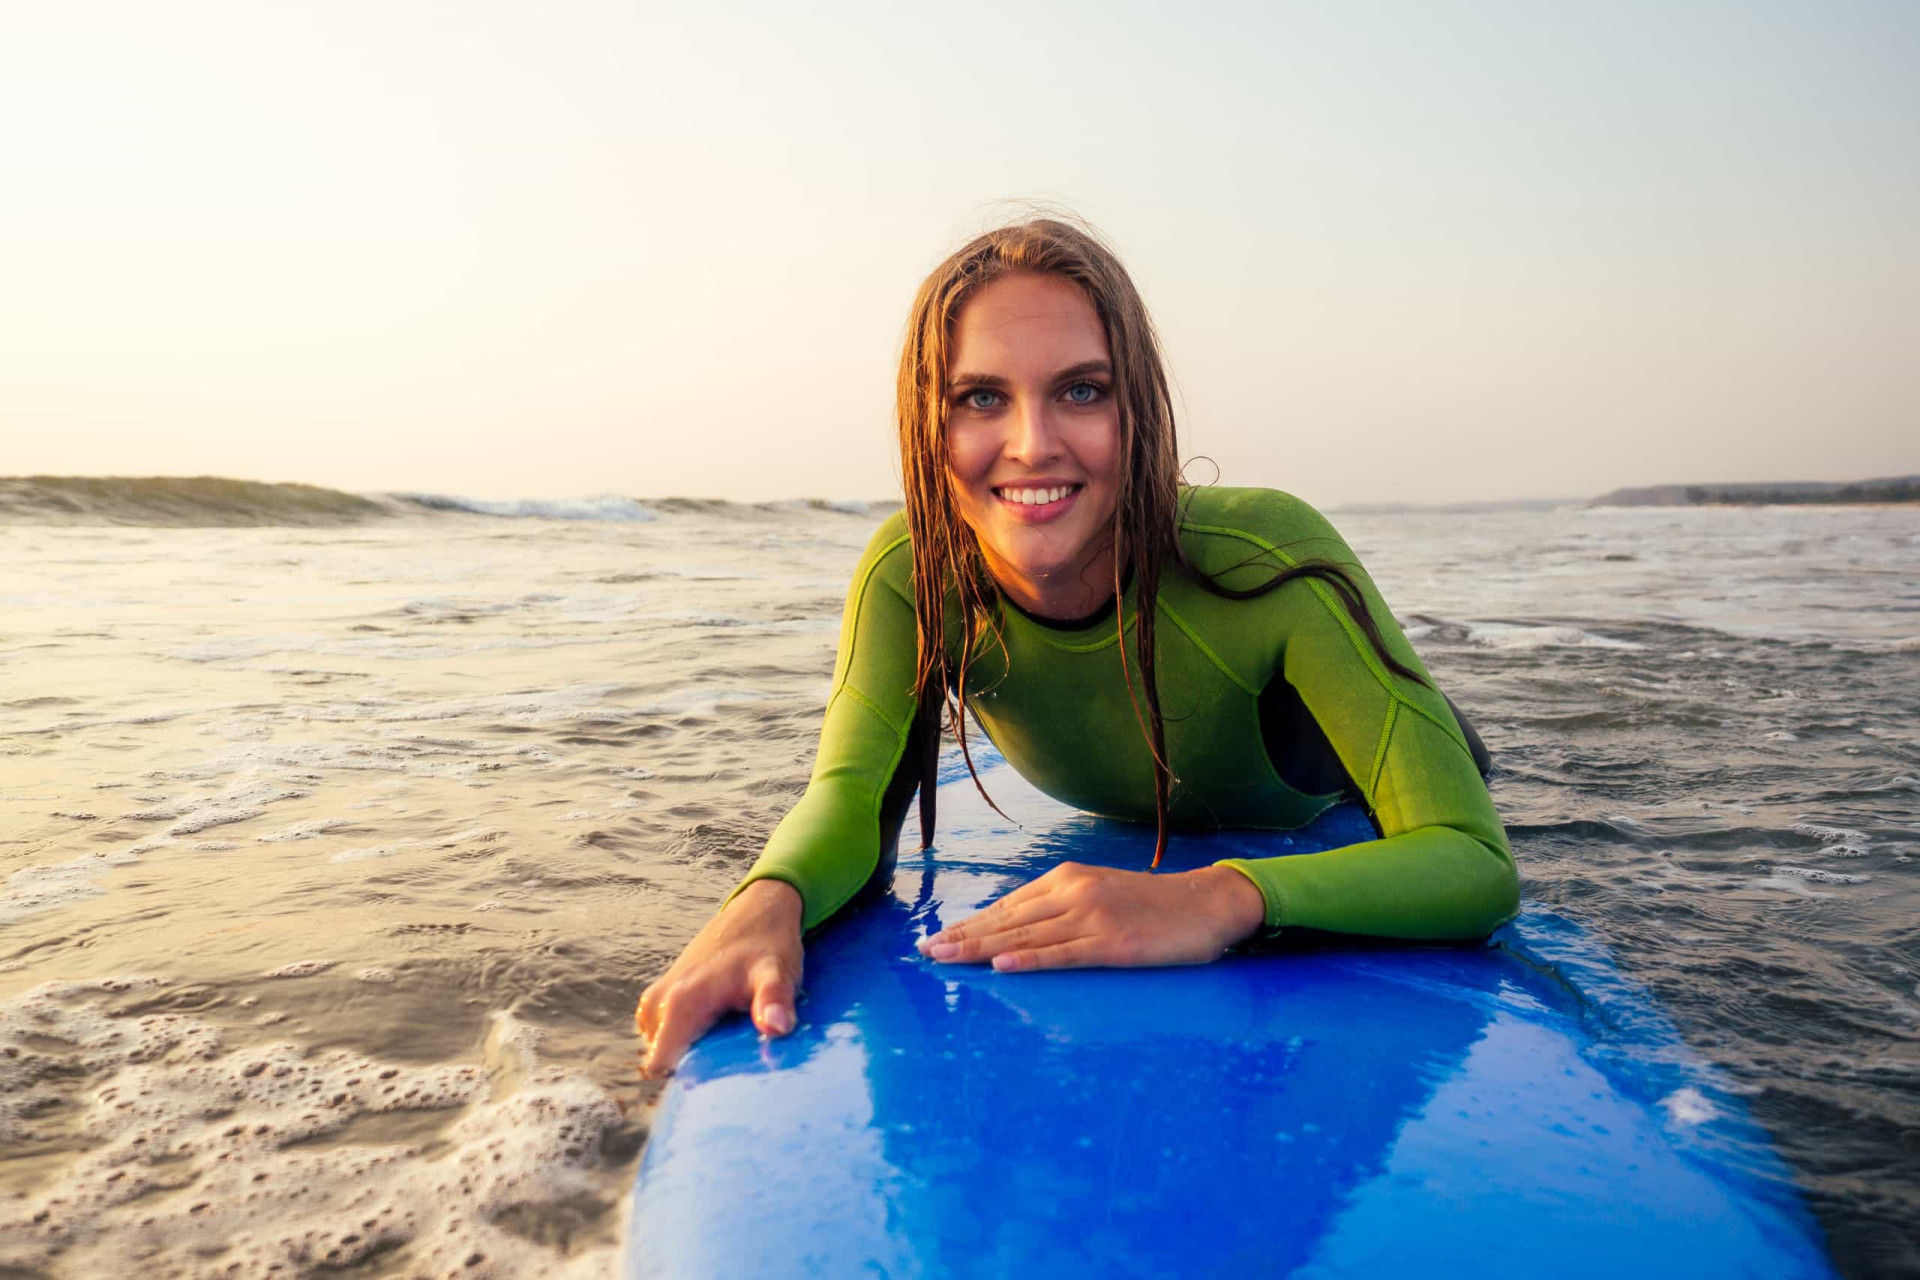 <p>Being a surf instructor is up there with one of the best jobs you can have as a water sports enthusiast. Sharing your surfing knowledge with others while earning a living is definitely worth making a splash about.</p><p><a href="https://www.msn.com/en-us/community/channel/vid-7xx8mnucu55yw63we9va2gwr7uihbxwc68fxqp25x6tg4ftibpra?cvid=94631541bc0f4f89bfd59158d696ad7e">Follow us and access great exclusive content every day</a></p>